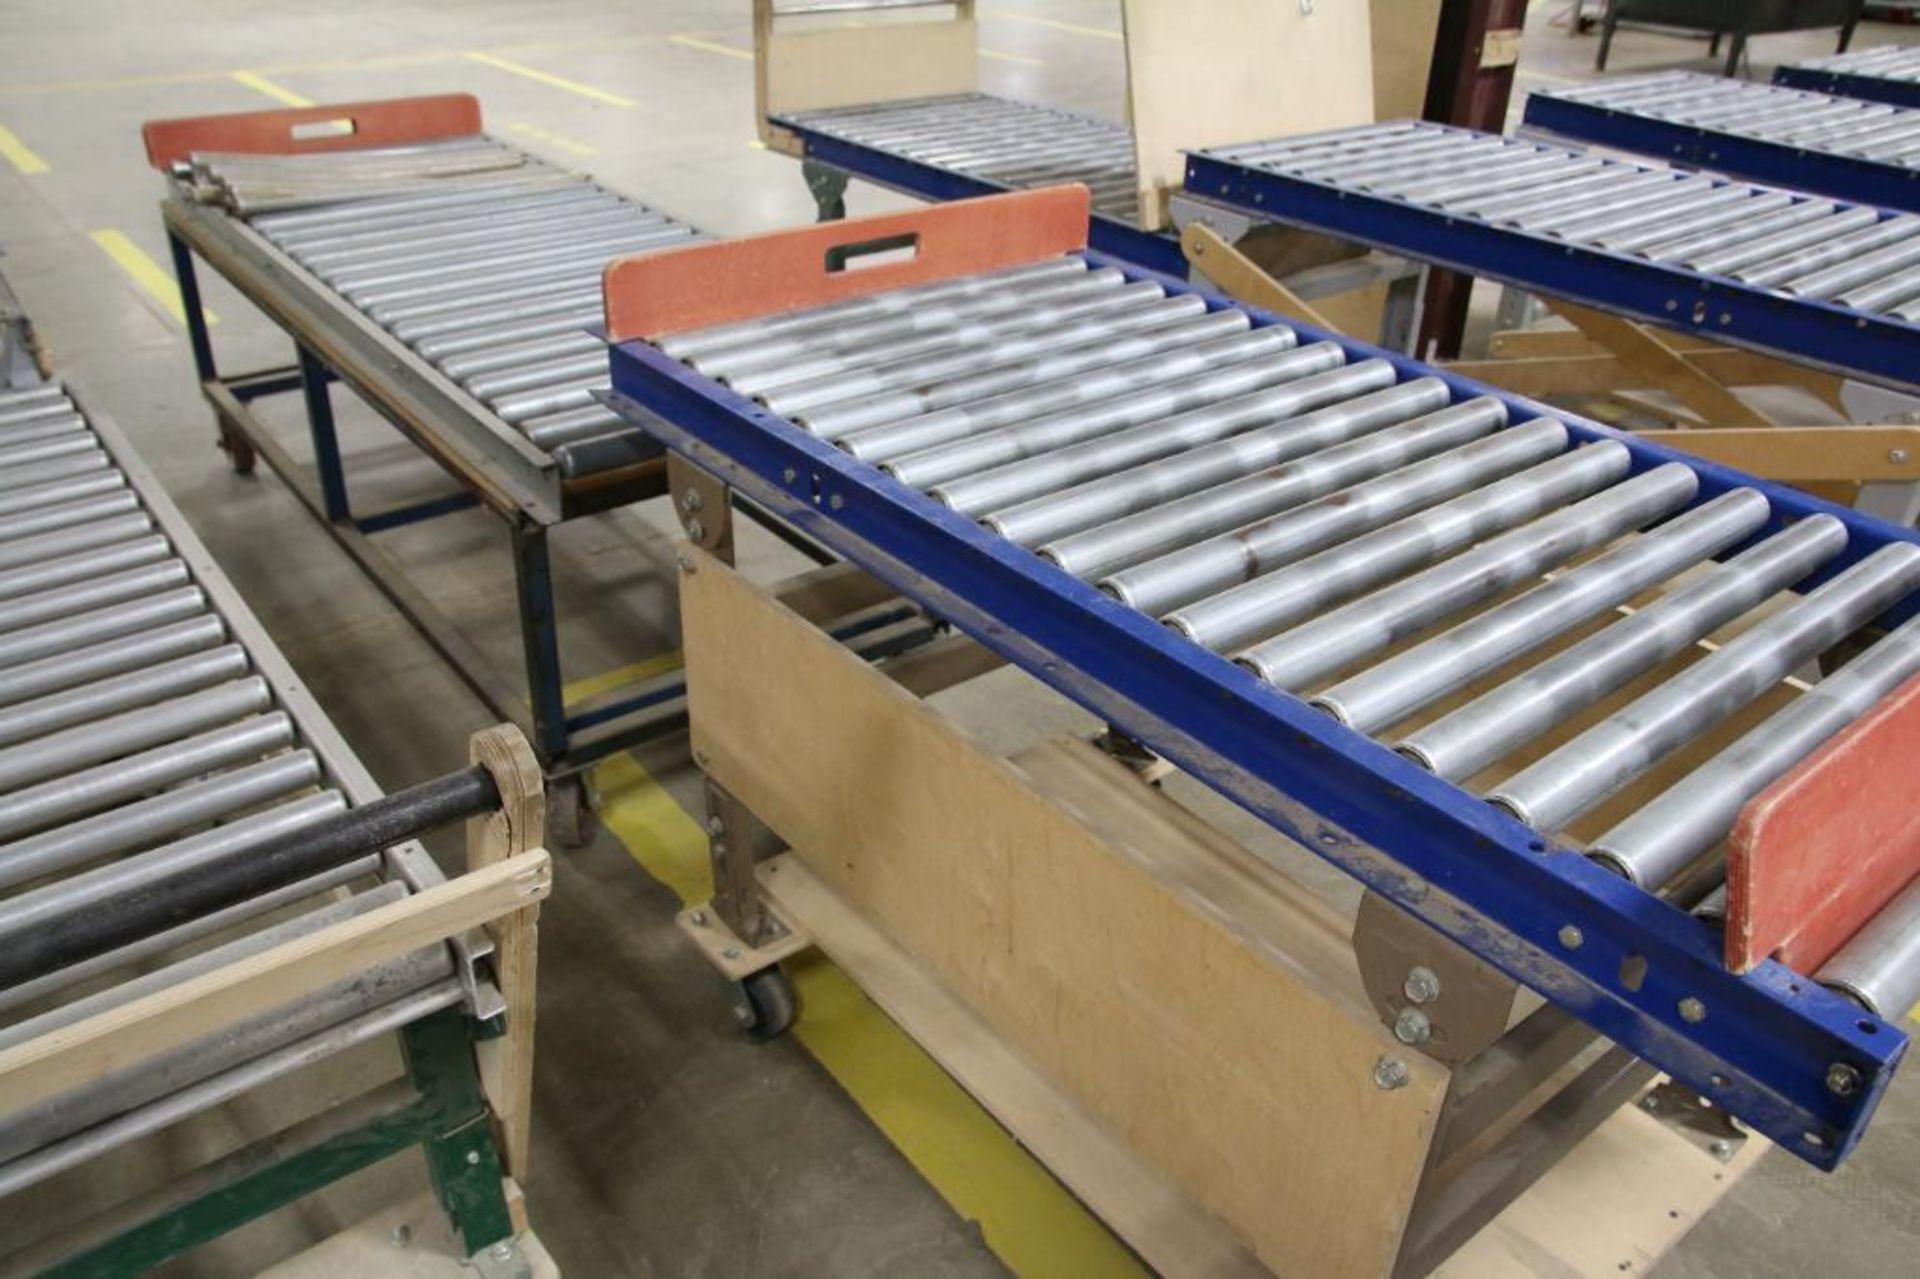 LOT: (3) Roller Conveyor Lines on Wheels, 60" x 30", 66" x 30" and 82" x 30", Heights of 30" and 36" - Image 2 of 2